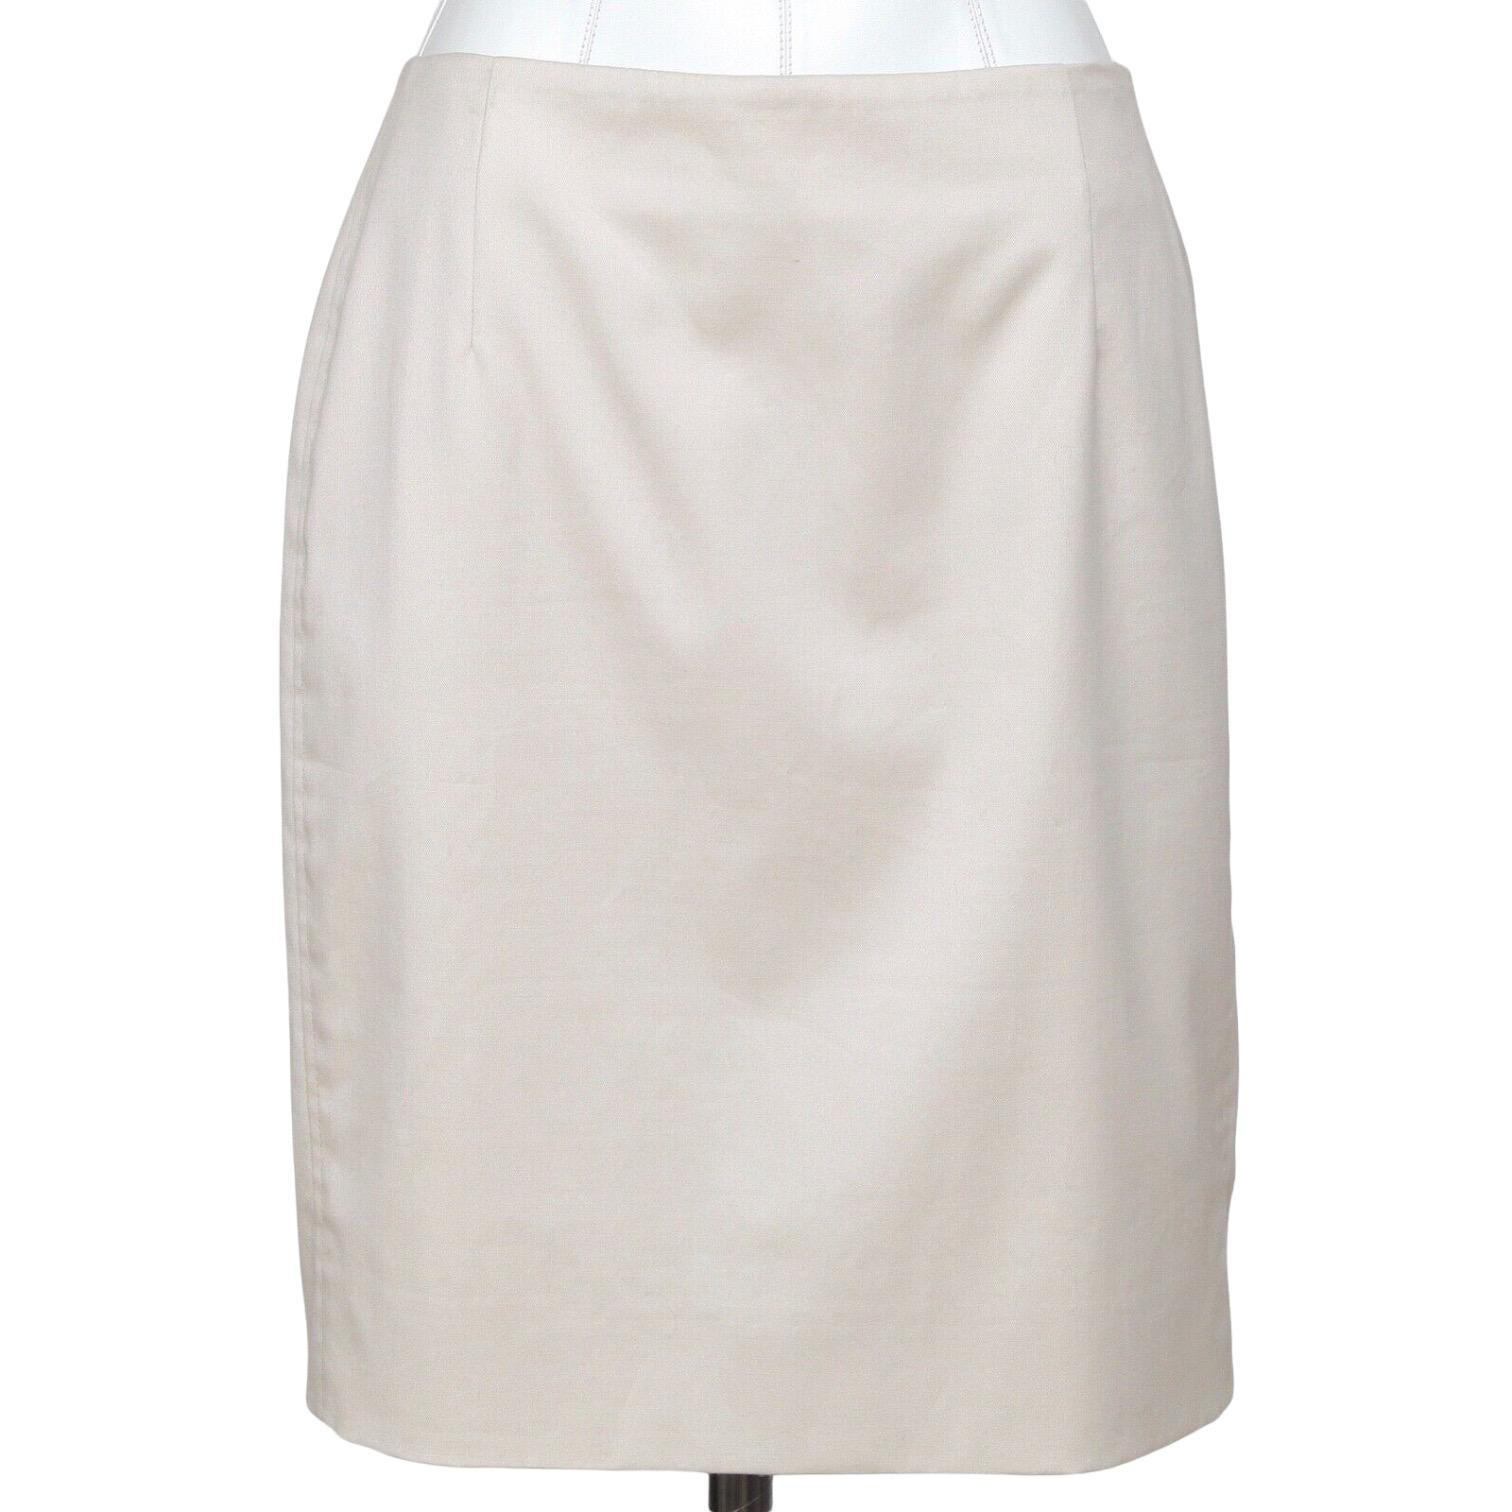 GUARANTEED AUTHENTIC AKRIS PUNTO BEIGE STRAIGHT KNEE LENGTH SKIRT

Design:
- Flat front
- Rear zipper and button closure
- Tonal stitching, darting.
- Fully lined.

Size: US 8, FR 40

Material: 97% Cotton, 3% Elastaine
Measurements:
- Waist: